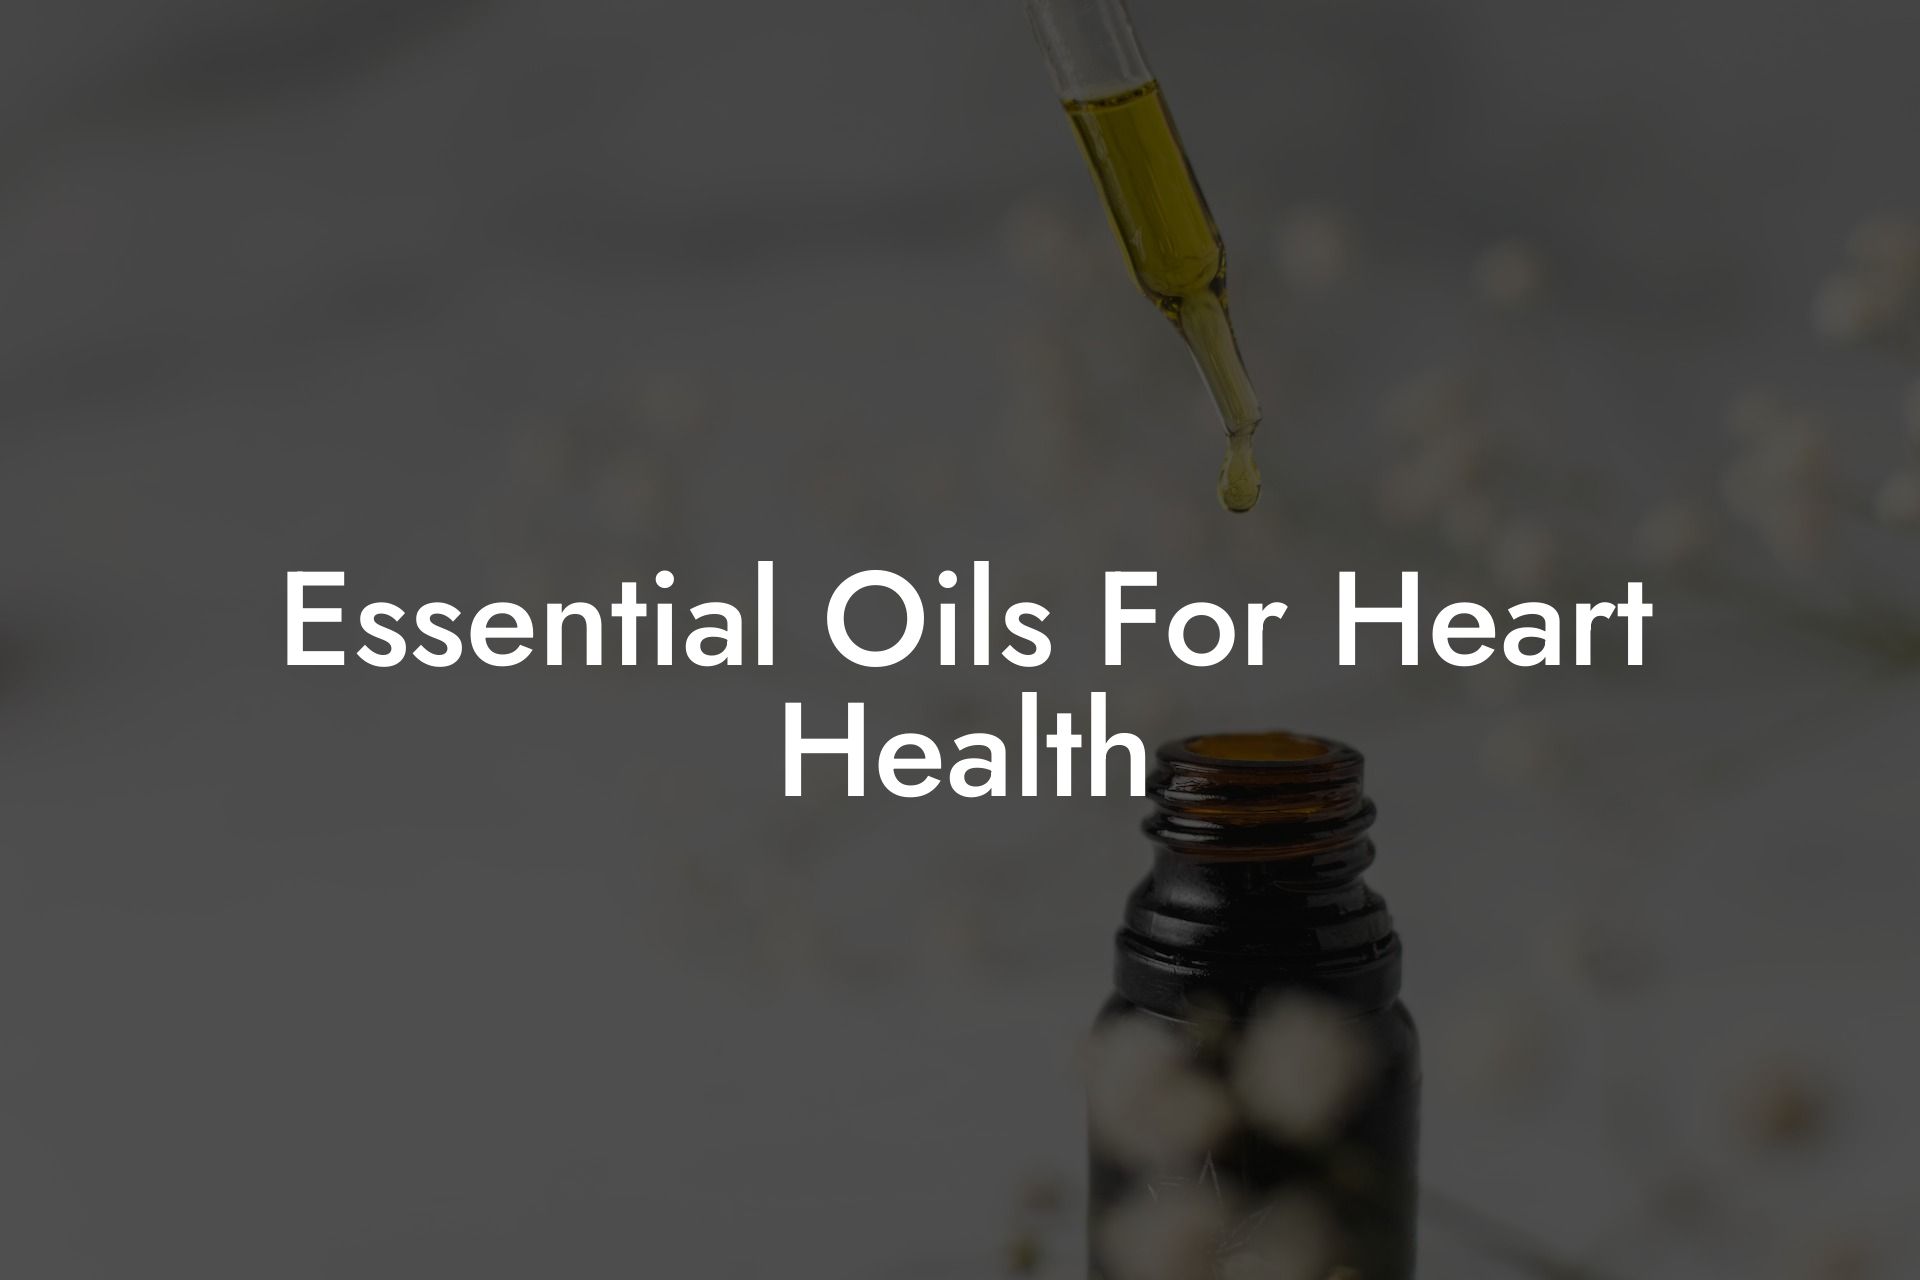 Essential Oils For Heart Health